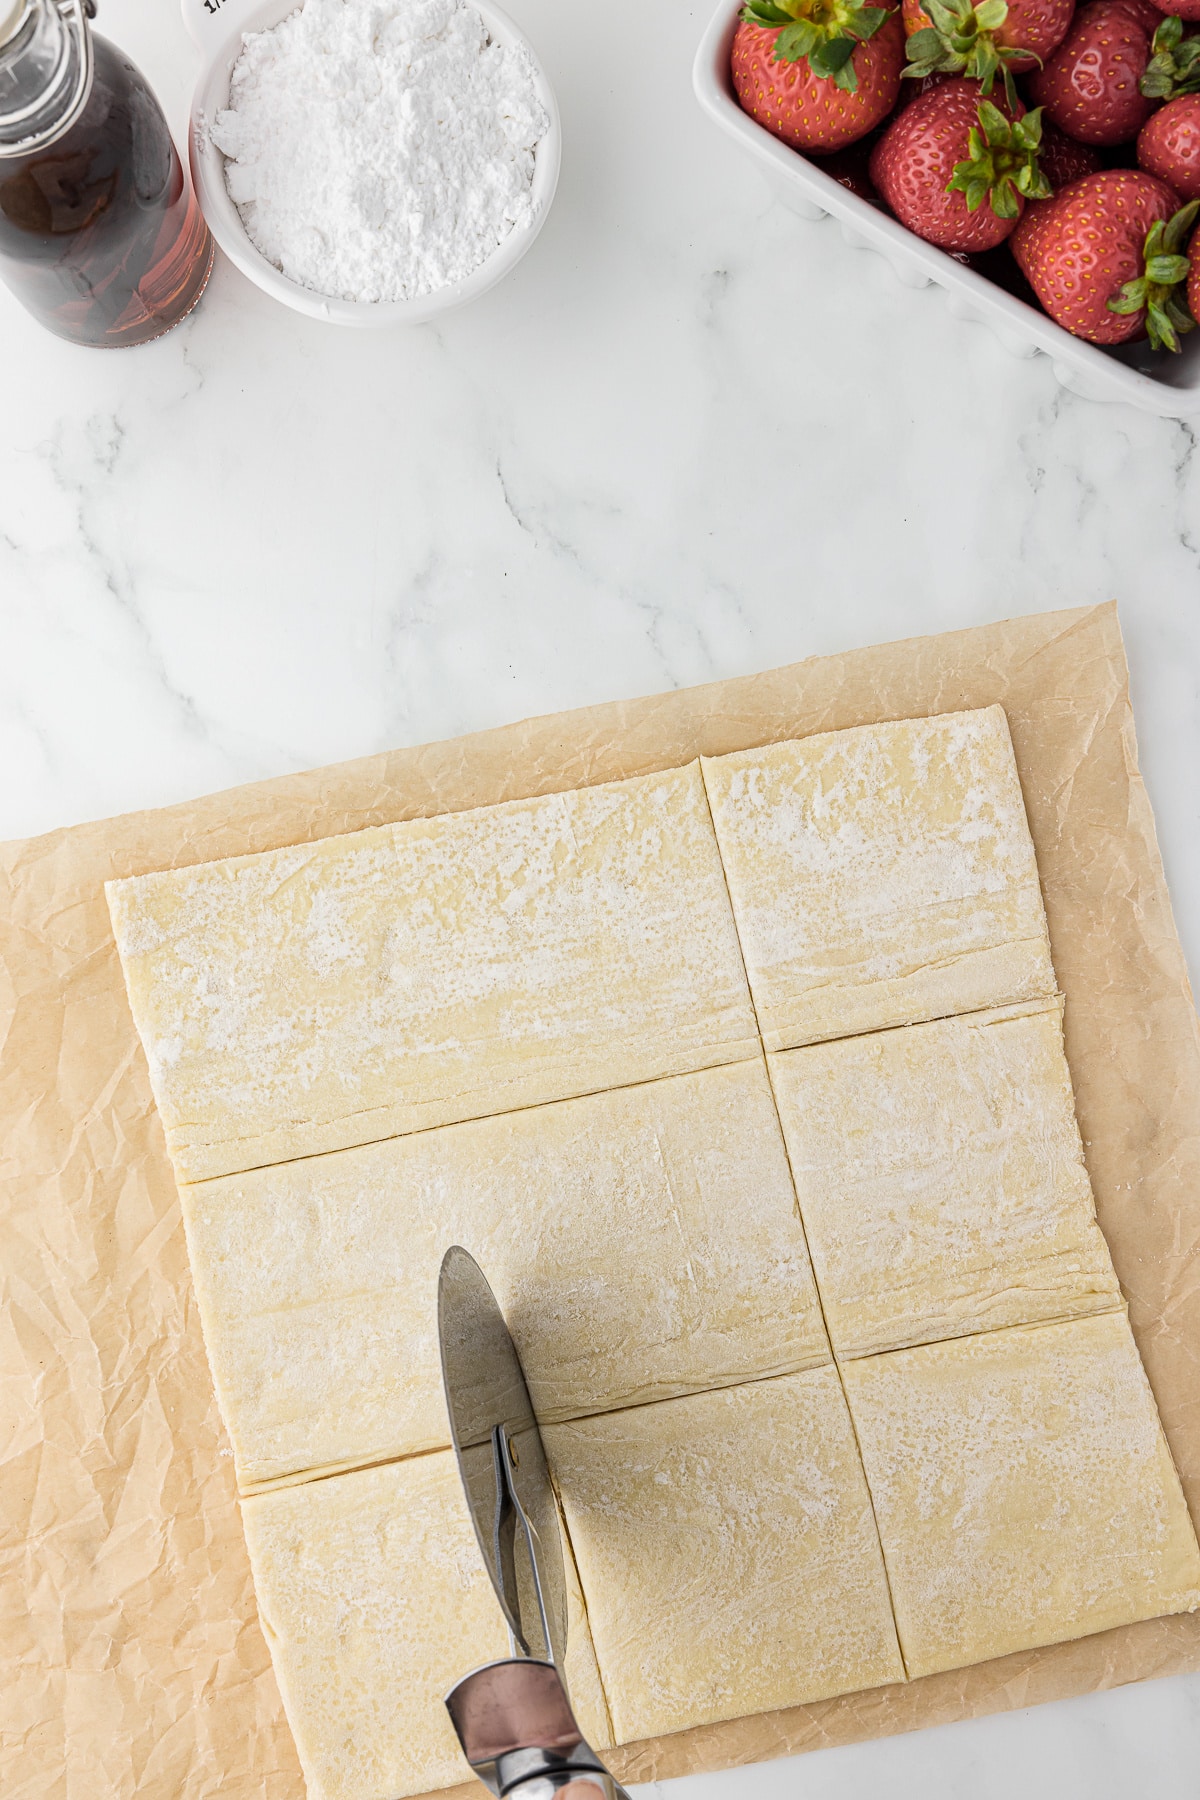 A pizza cutter cutting up squares in a sheet of puff pastry with strawberries and powdered sugar in the background